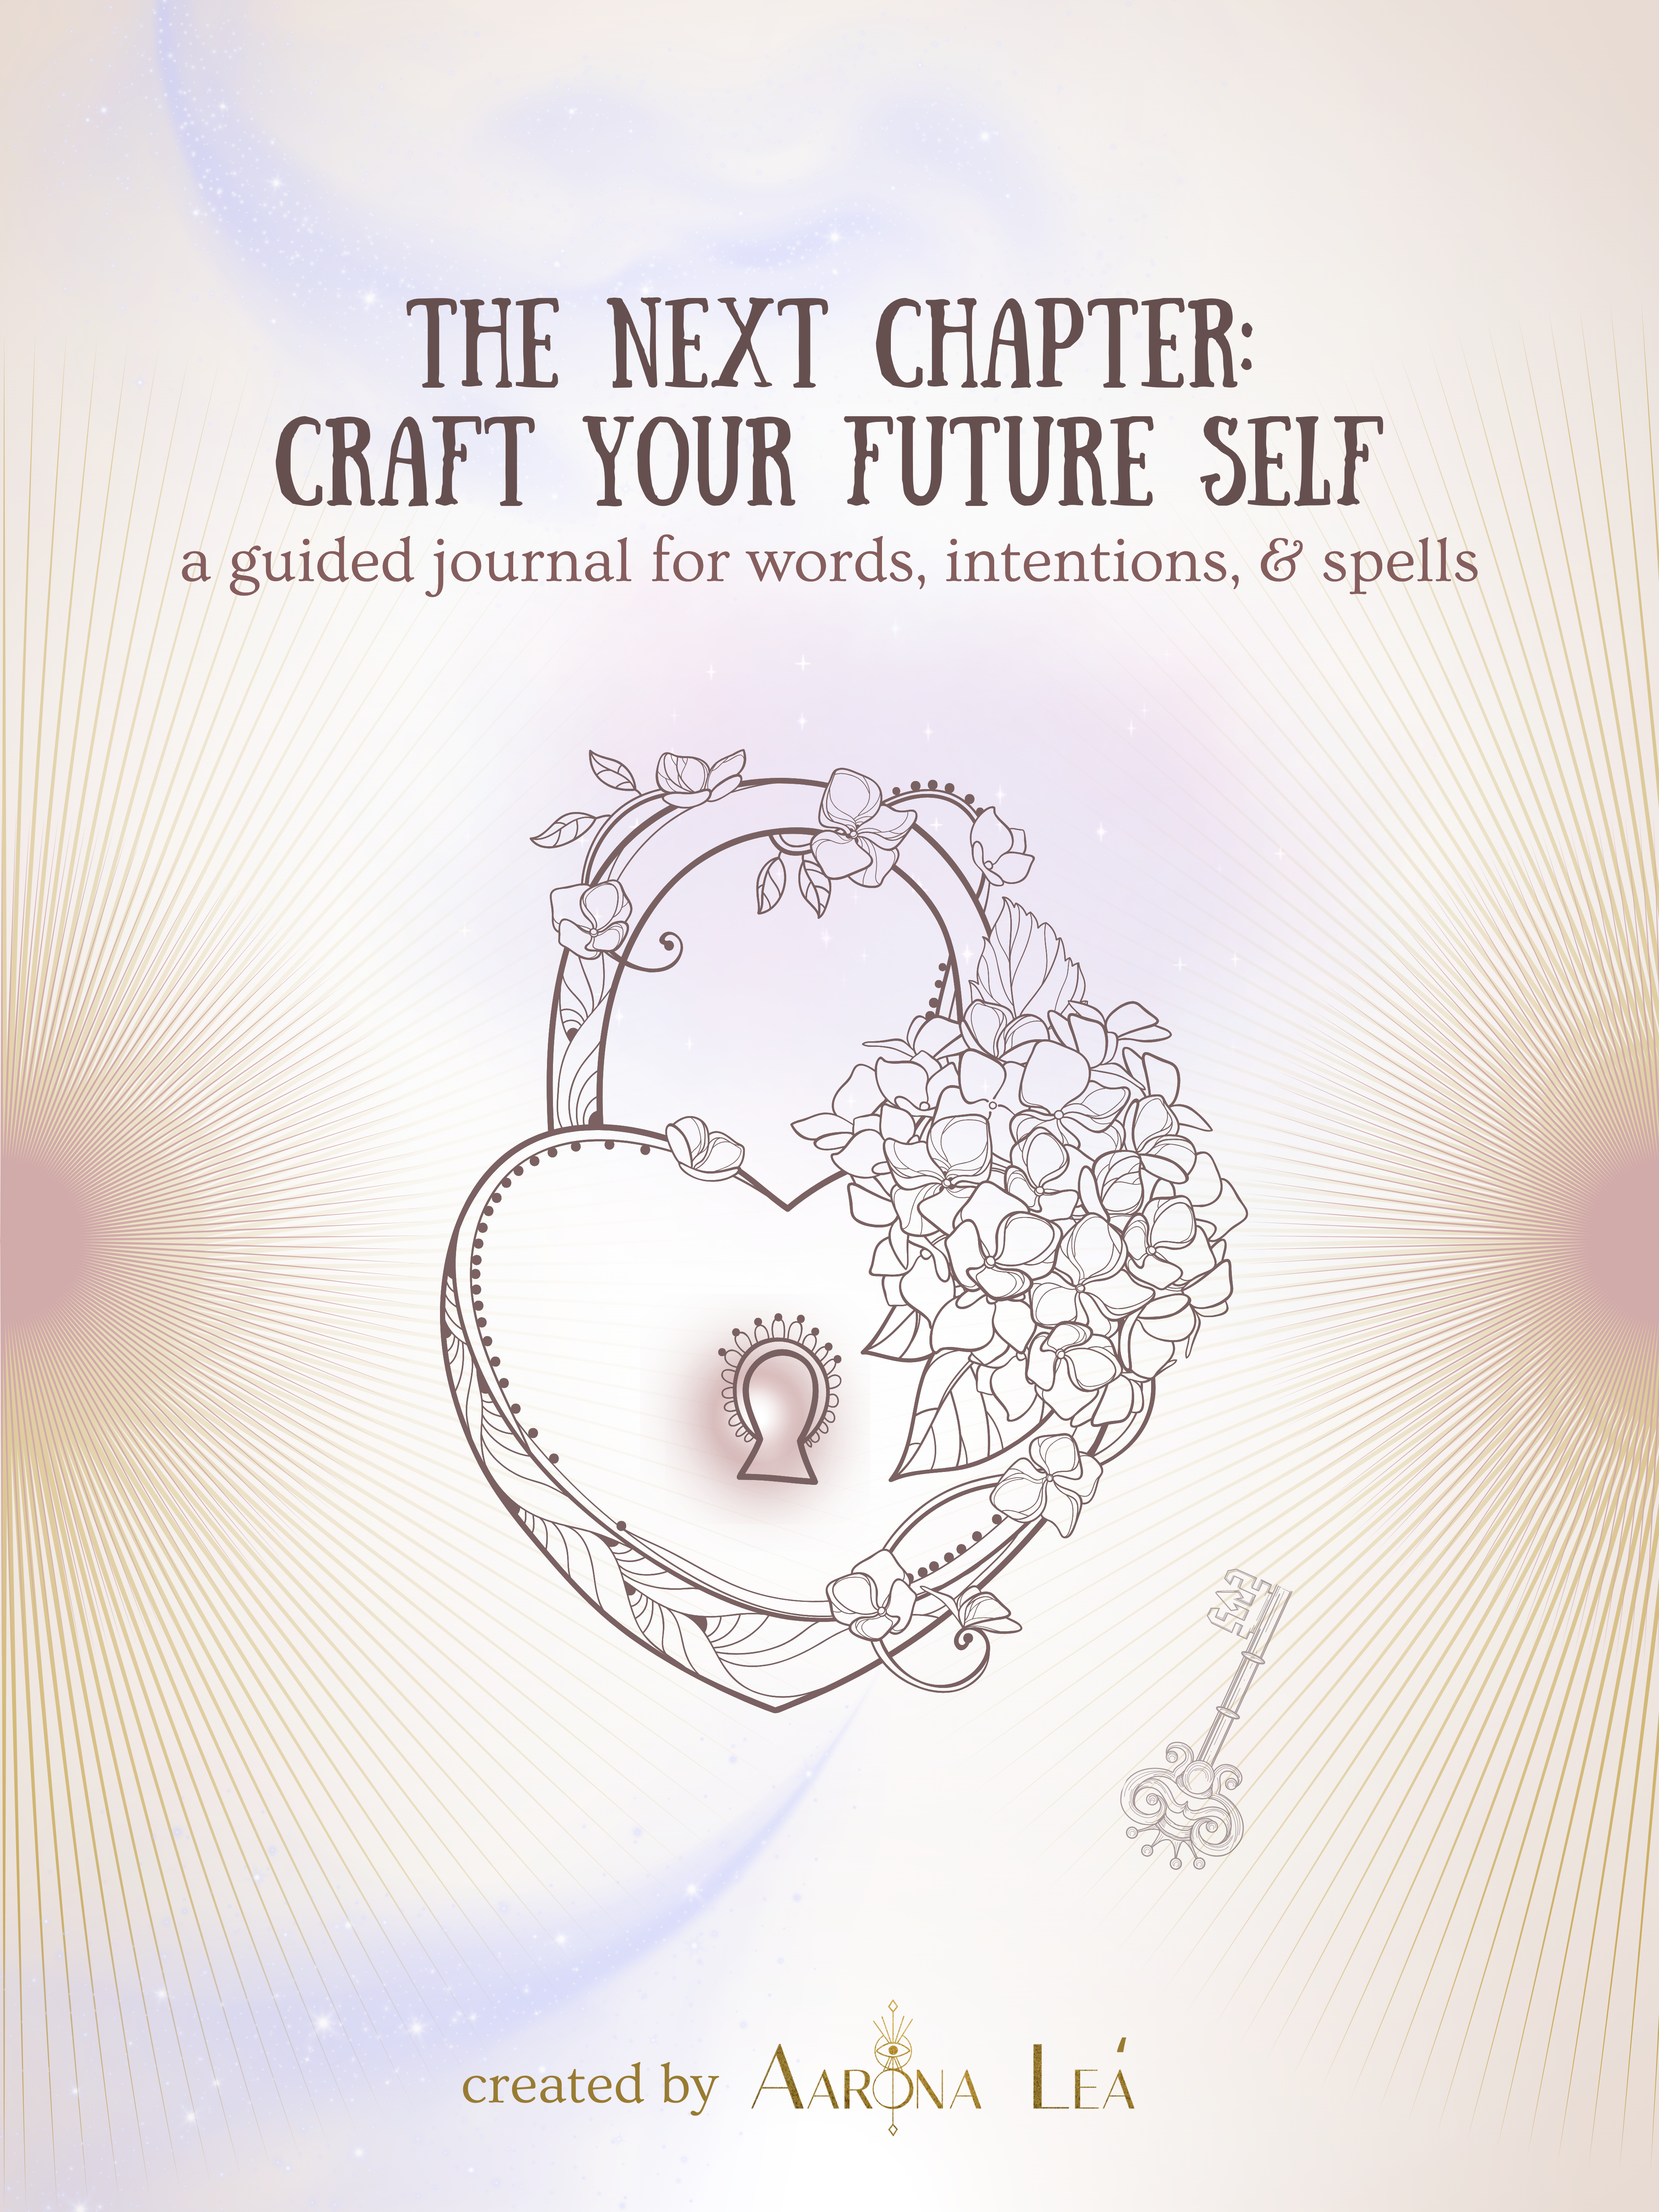 The Next Chapter: Craft Your Future Self